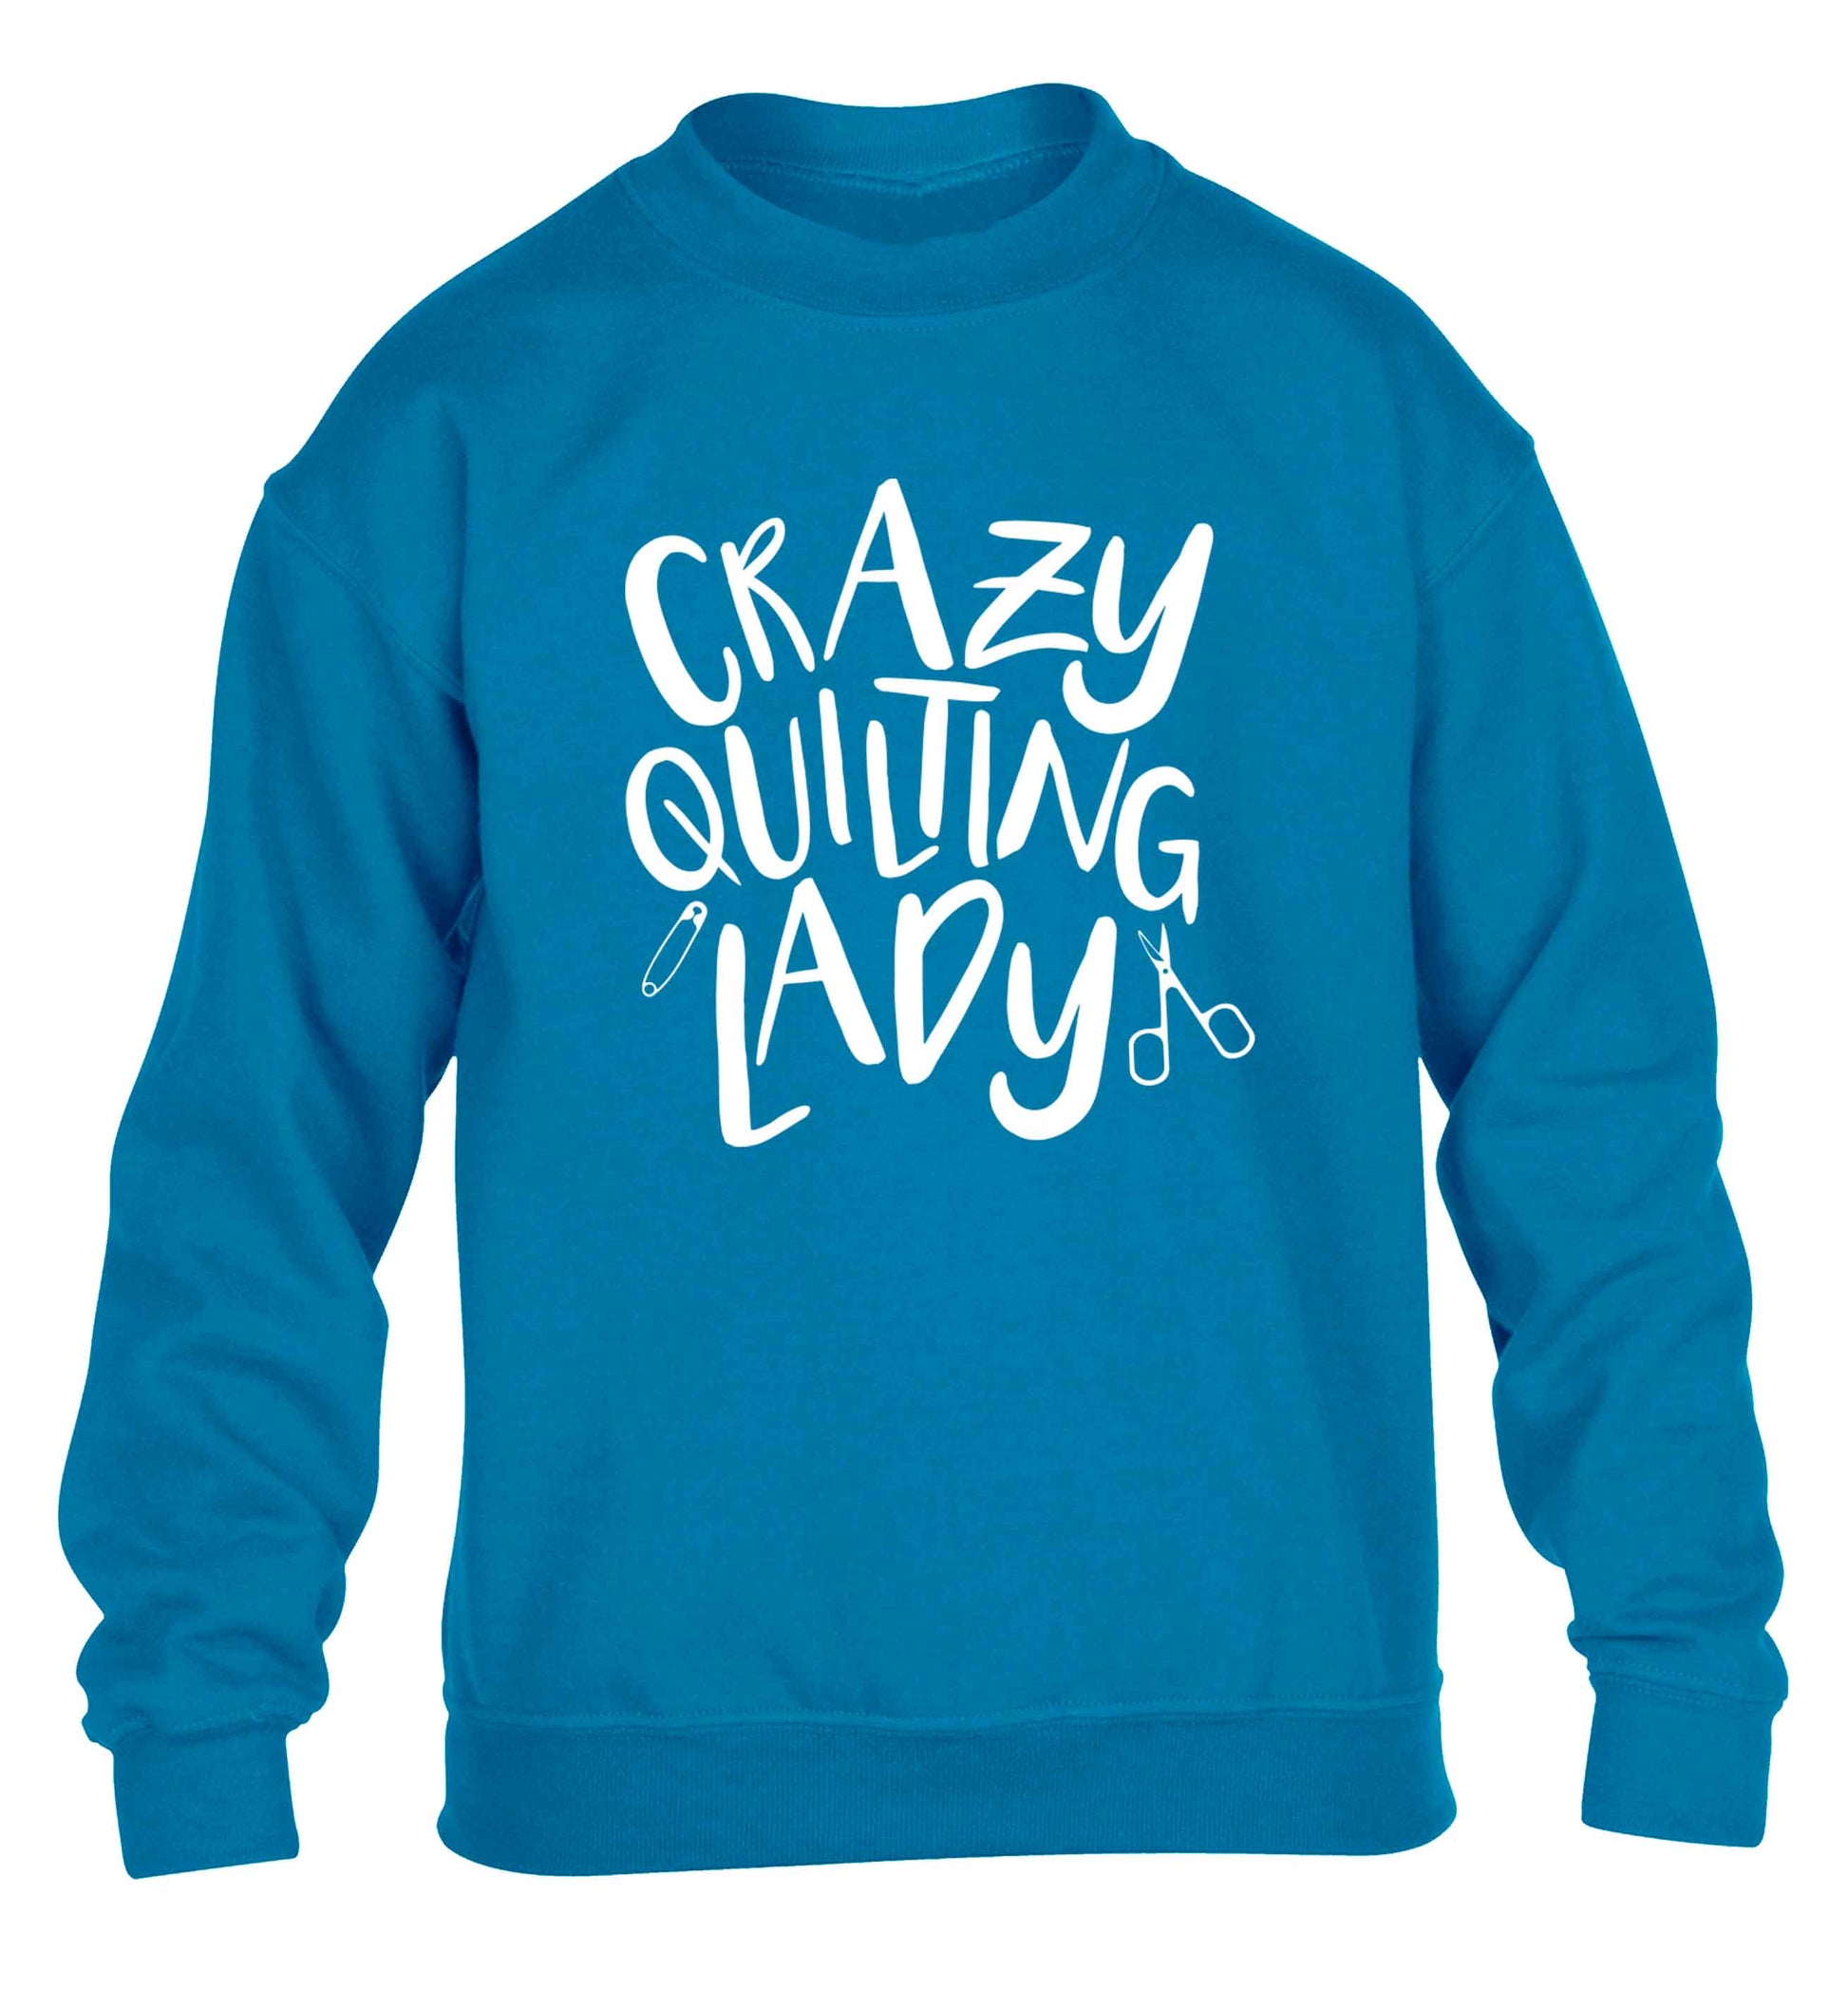 Crazy quilting lady children's blue sweater 12-13 Years